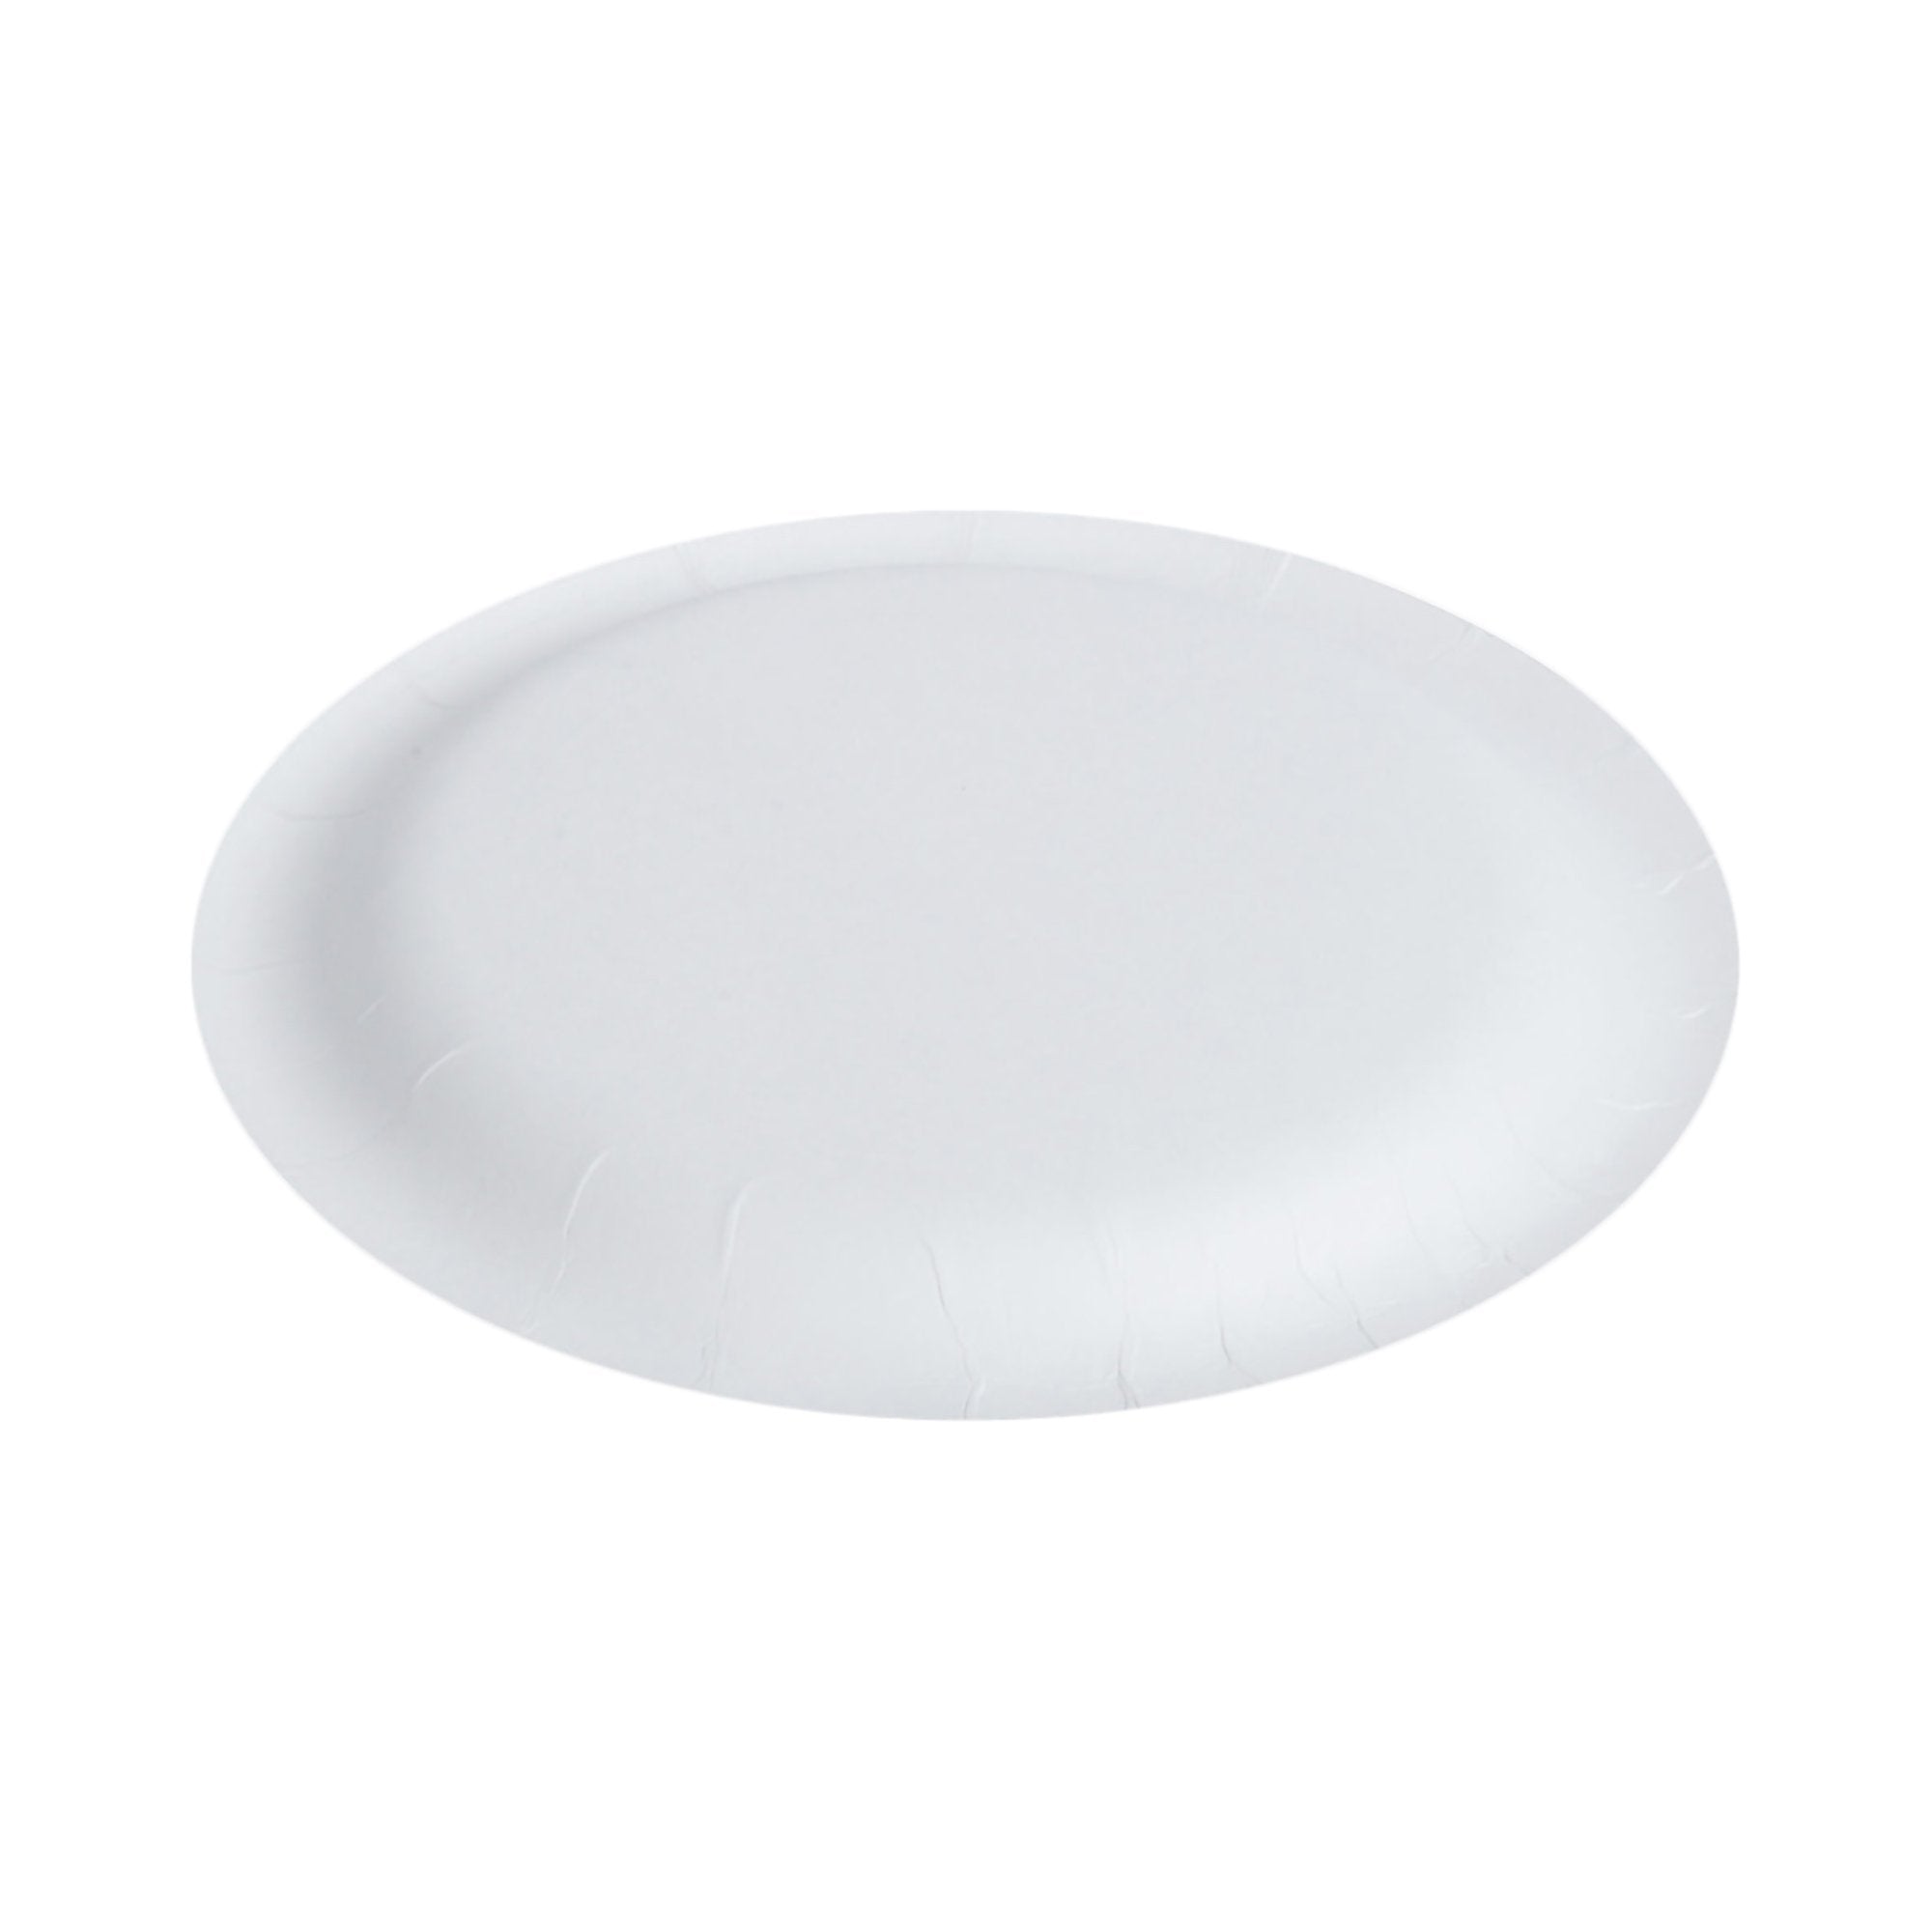 Bare® Coated Paper Plate, 8-1/2 Inch Diameter (125 Units)